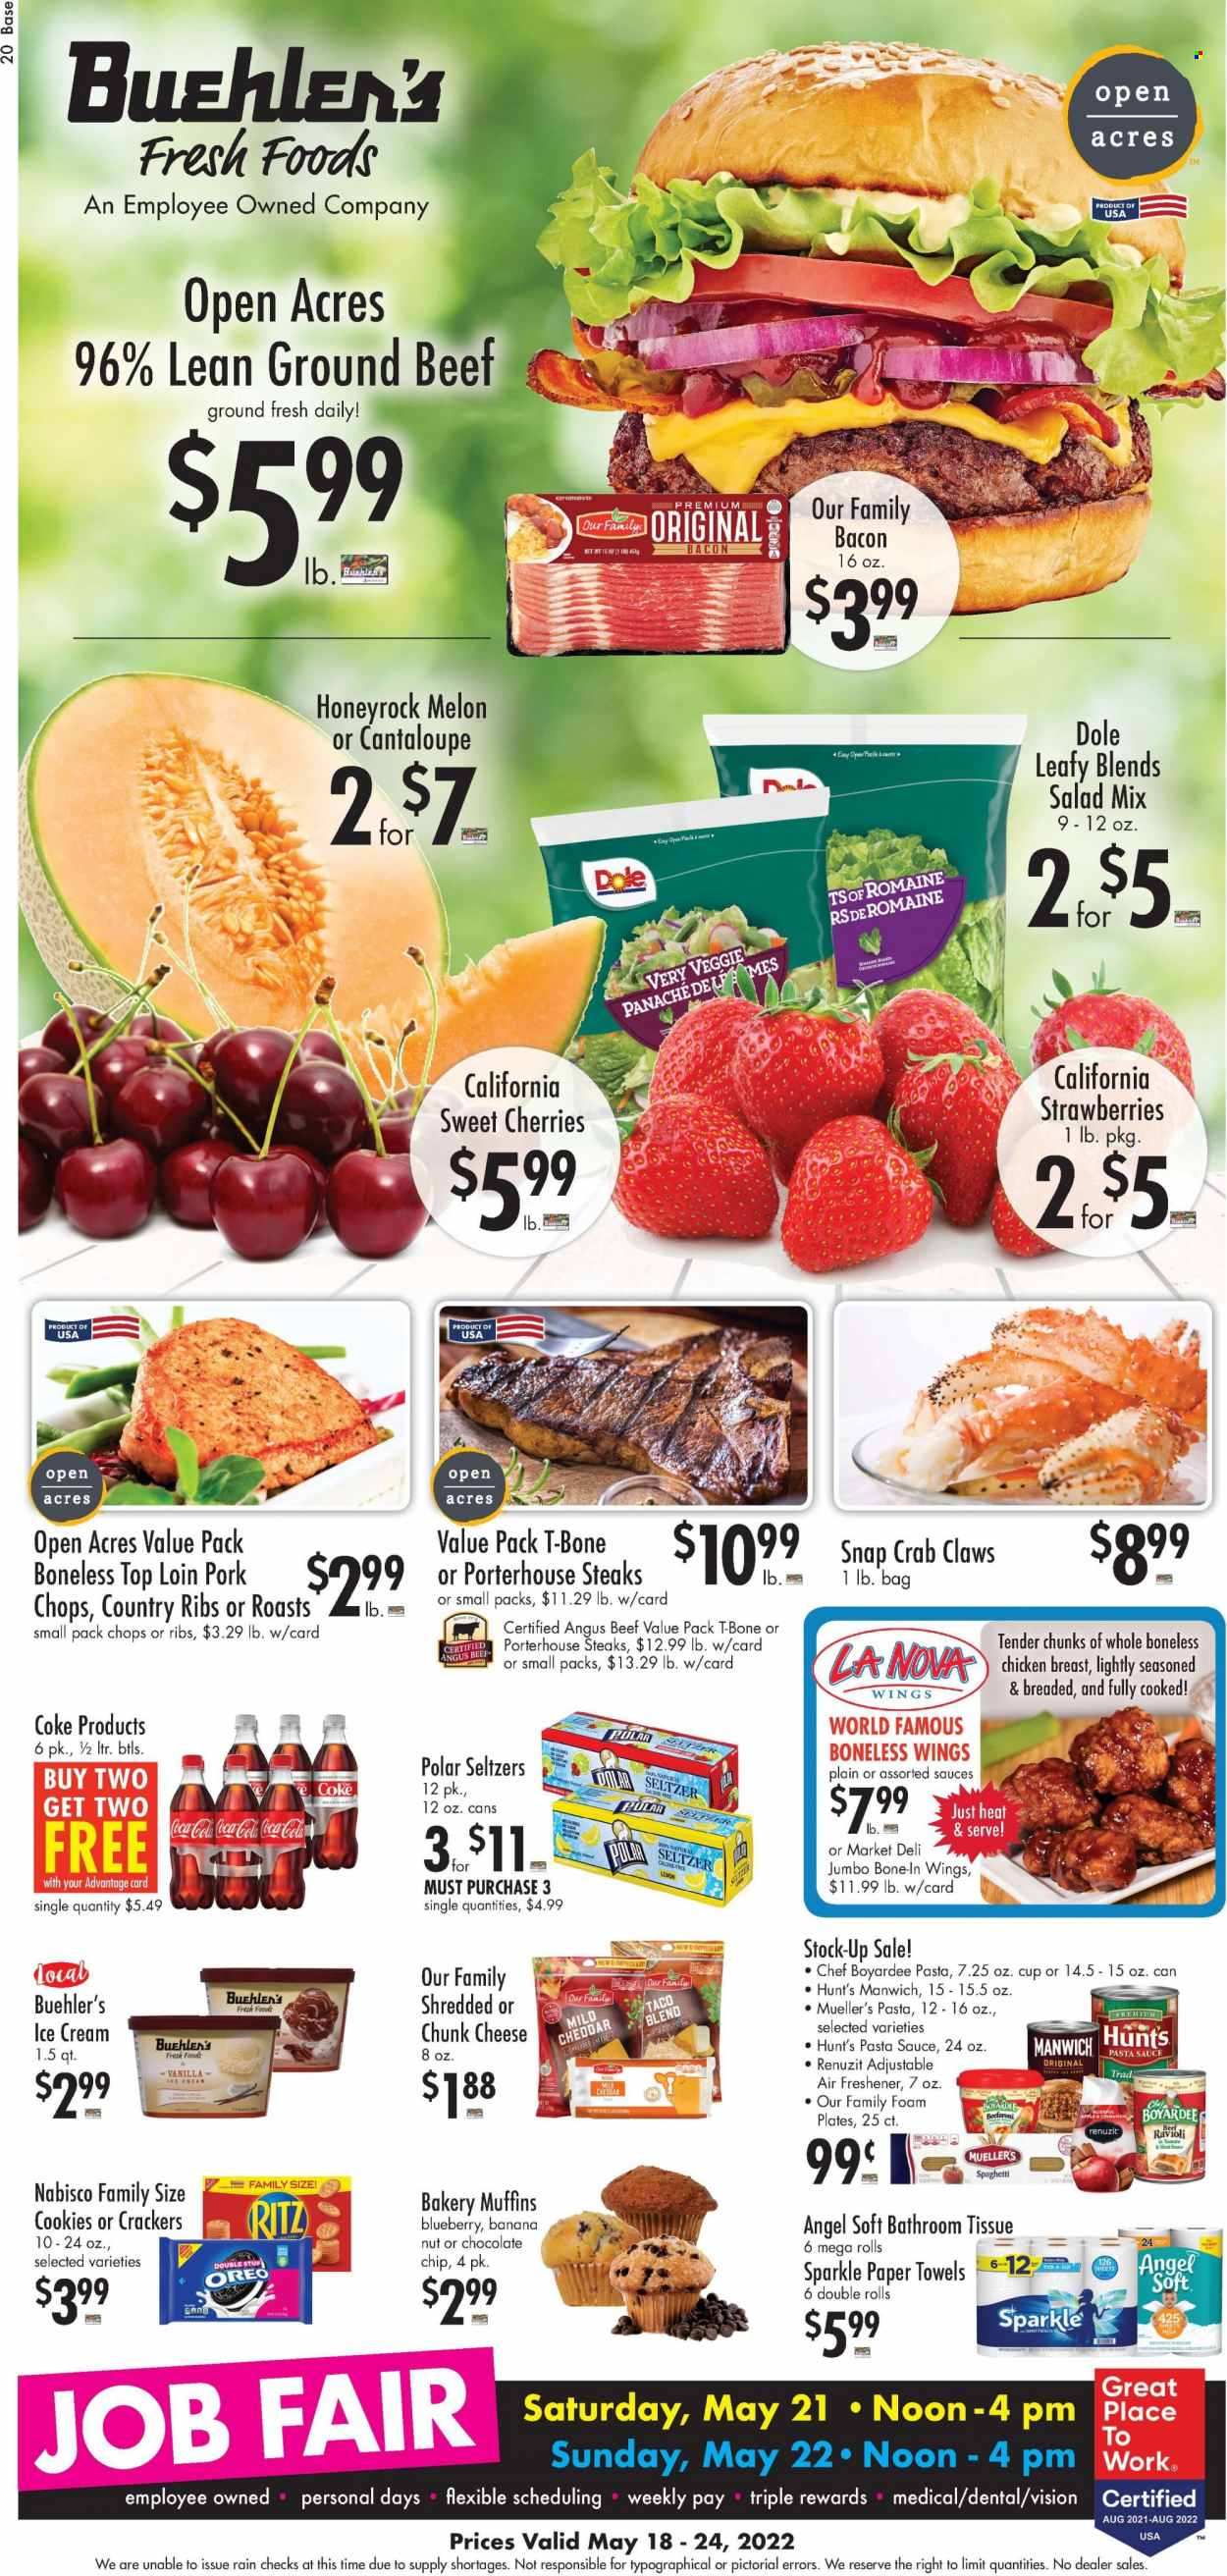 thumbnail - Buehler's Flyer - 05/18/2022 - 05/24/2022 - Sales products - muffin, salad, Dole, strawberries, crab, ravioli, spaghetti, pasta sauce, bacon, mild cheddar, shredded cheese, cheddar, chunk cheese, Oreo, Milo, ice cream, cookies, crackers, RITZ, Manwich, Chef Boyardee, cinnamon, Coca-Cola, seltzer water, beef meat, ground beef, t-bone steak, steak, portehouse steak, pork chops, pork meat, bath tissue, kitchen towels, paper towels, plate, Renuzit, air freshener, melons. Page 1.